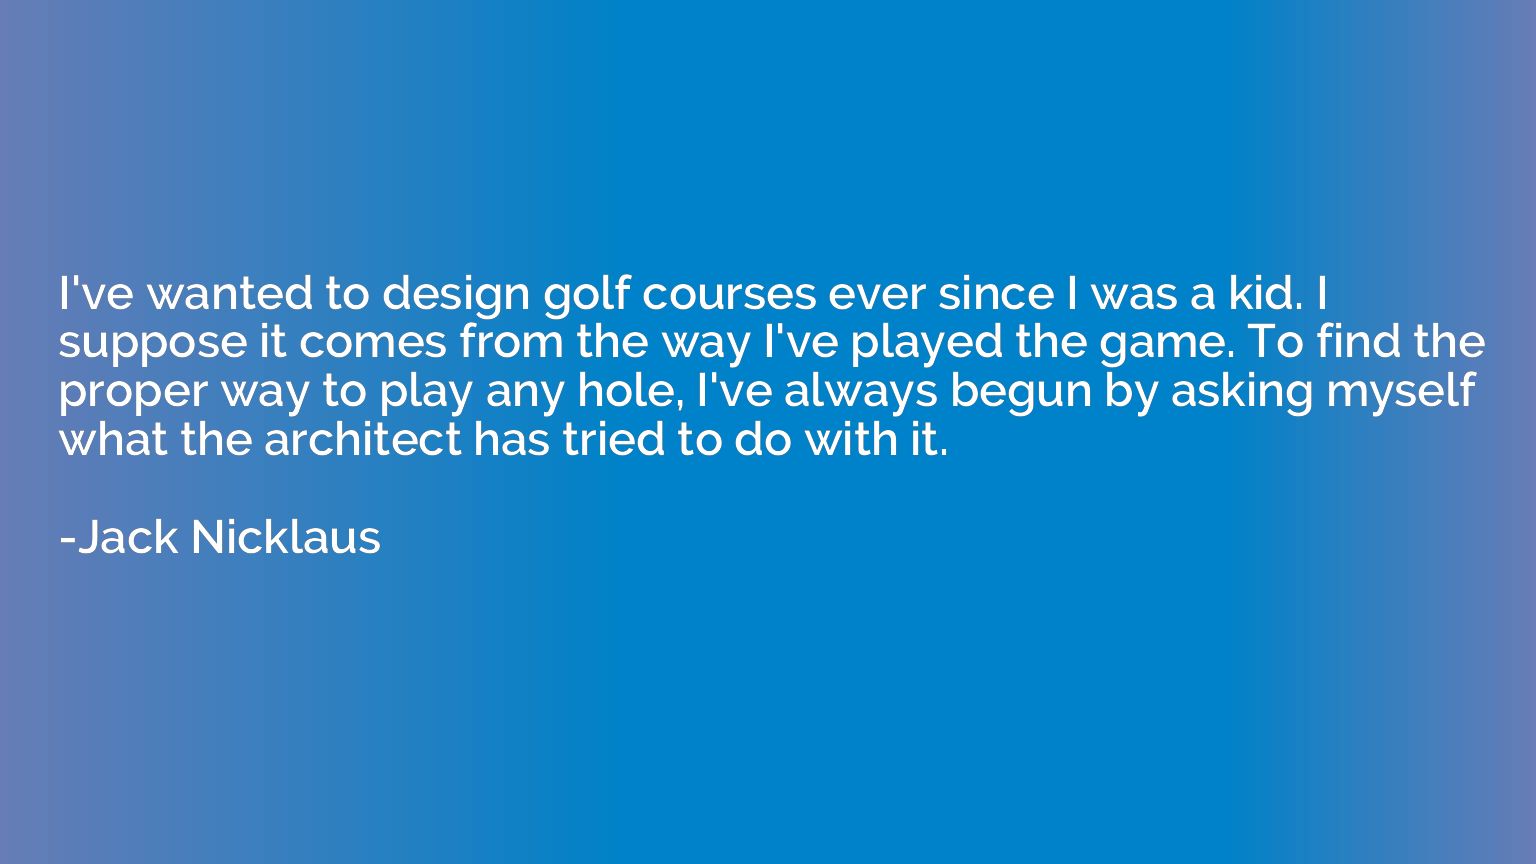 I've wanted to design golf courses ever since I was a kid. I